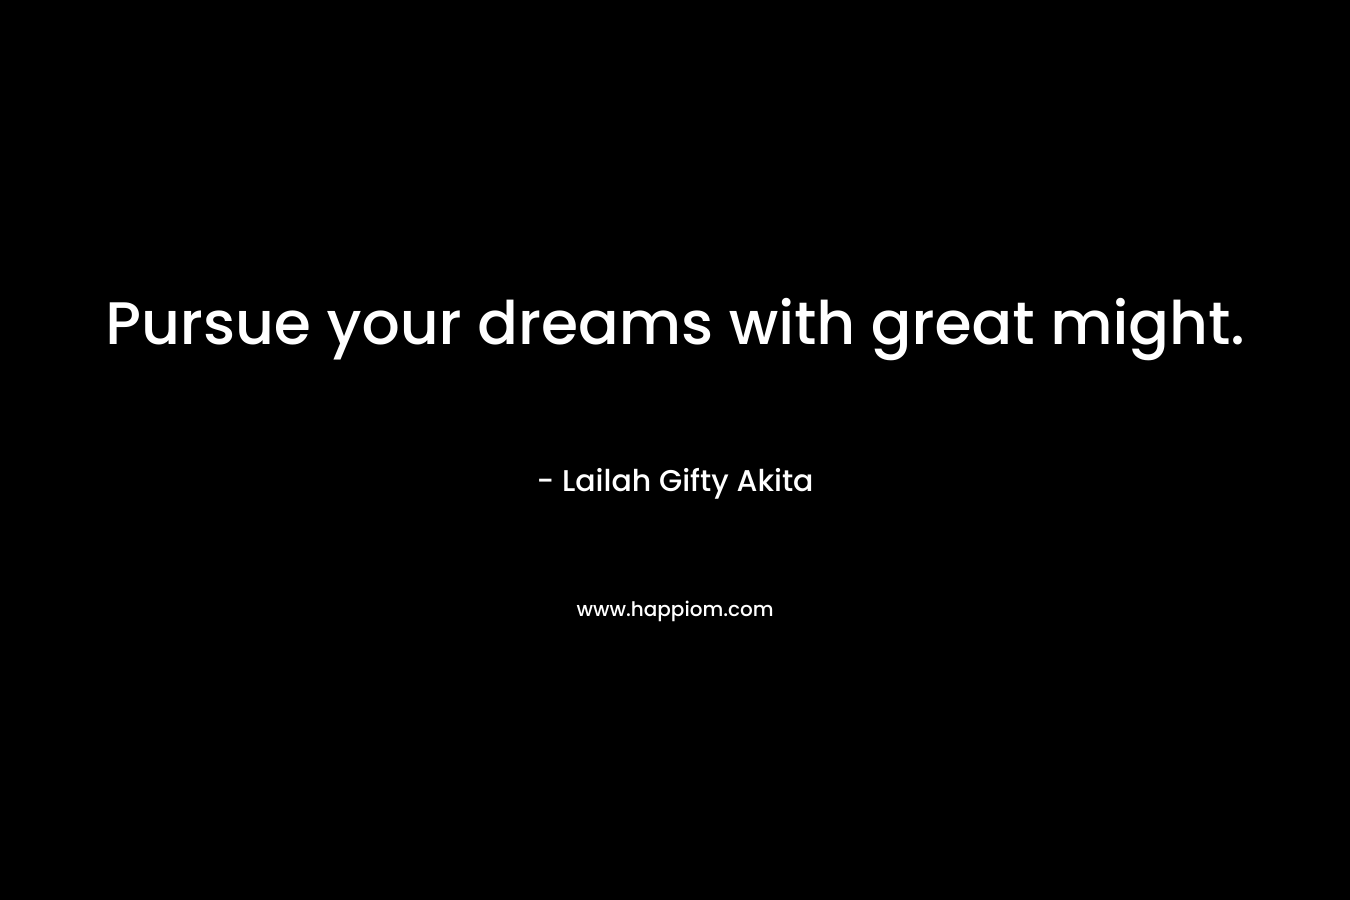 Pursue your dreams with great might.